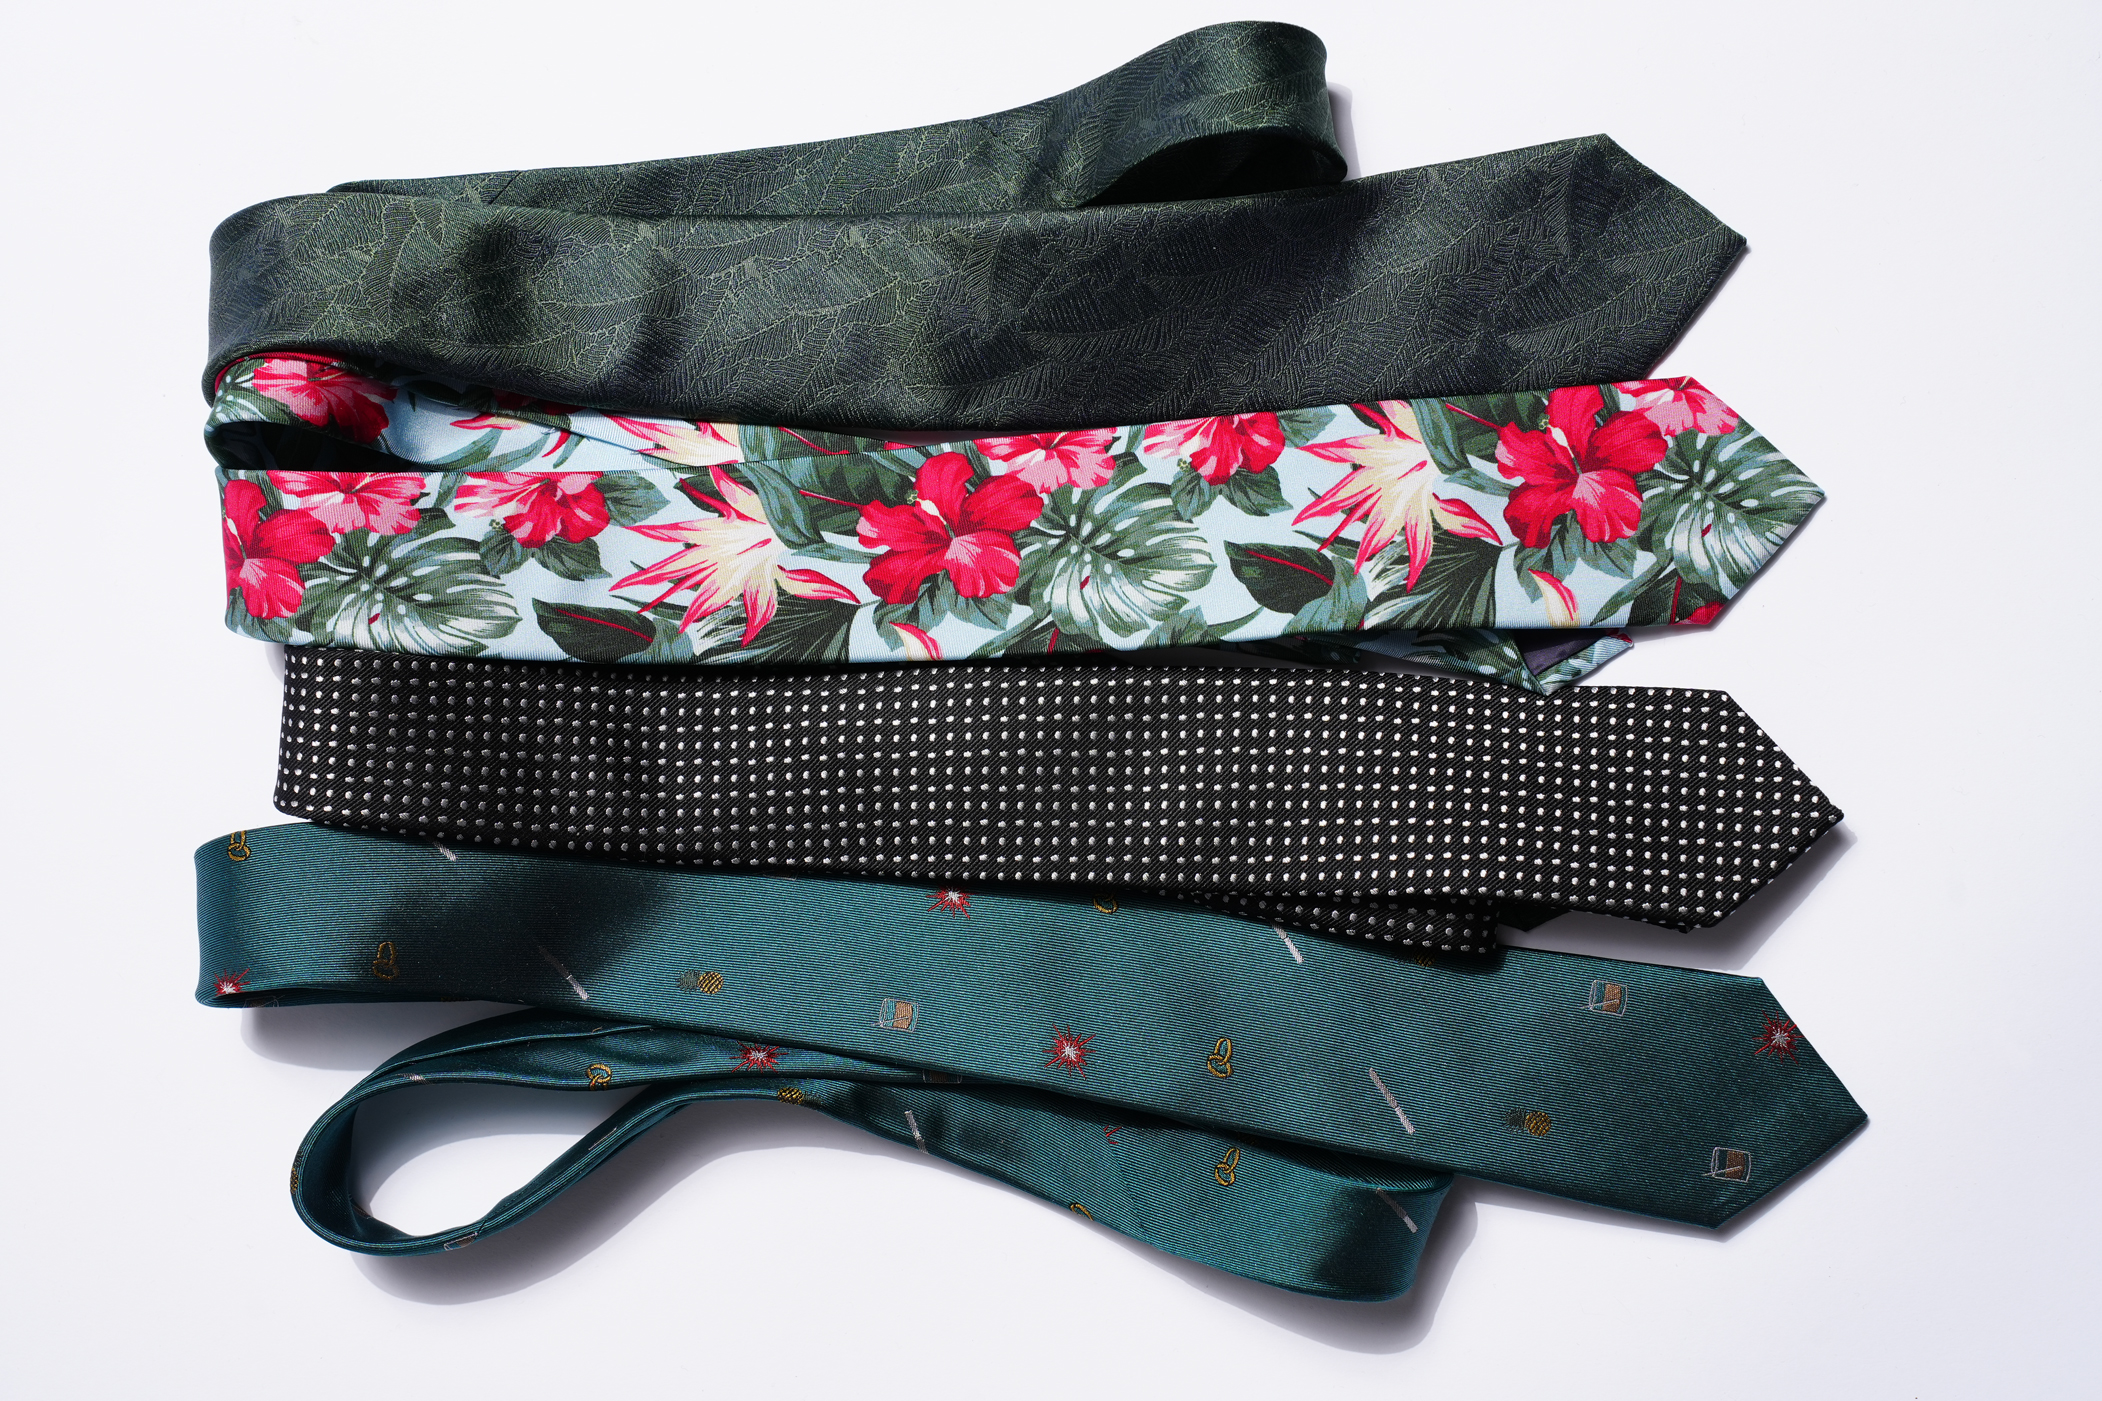 These fun ties are great wedding-related products for the groom.